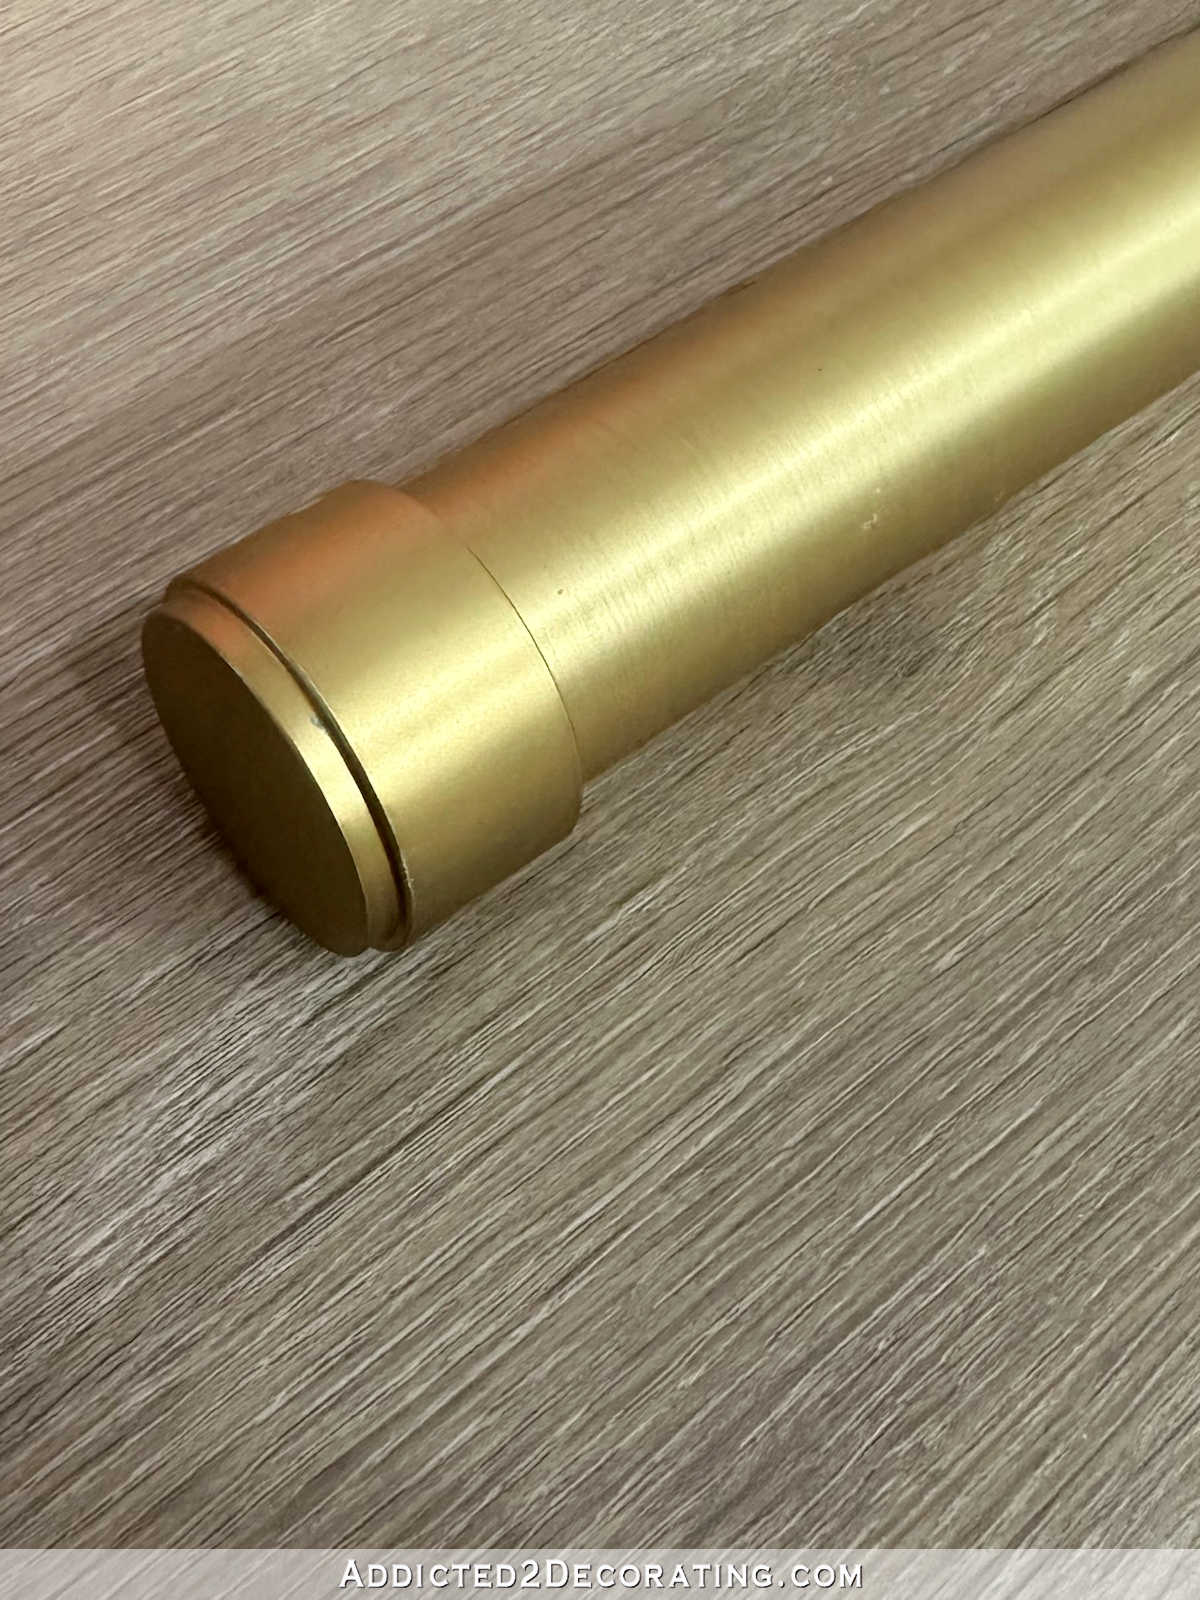 My New Favorite Brushed Gold (Brushed Brass) Curtain Rod (And How To Customize The Length Of Non-Adjustable, Non-Telescoping Curtain Rods)